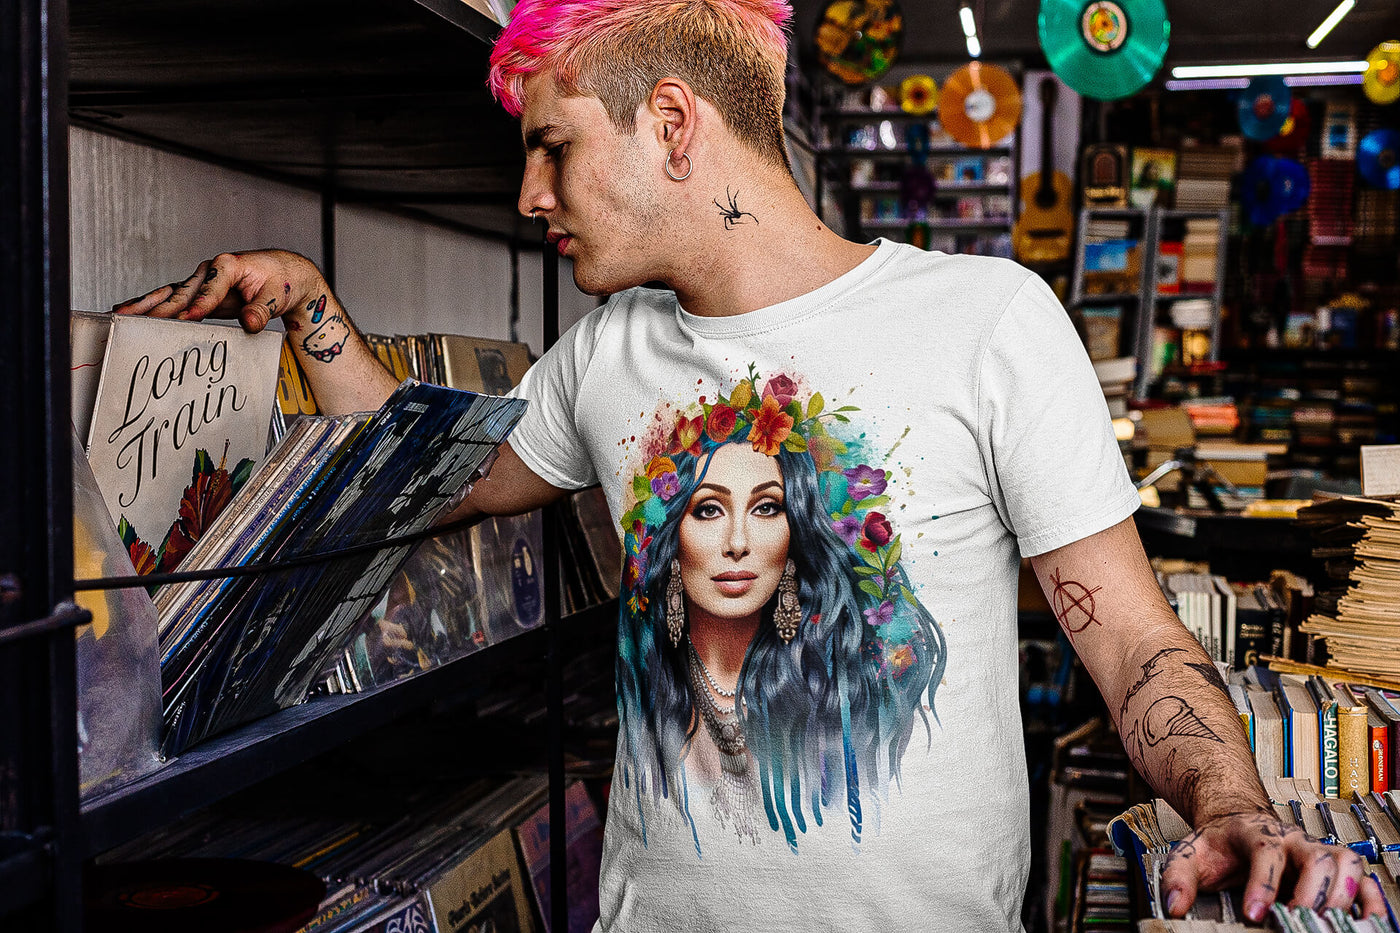 Tattooed young man at a vinyl record store, wearing Gllamazon's Cher-ry Blossom Cher T-shirt. Color: White.